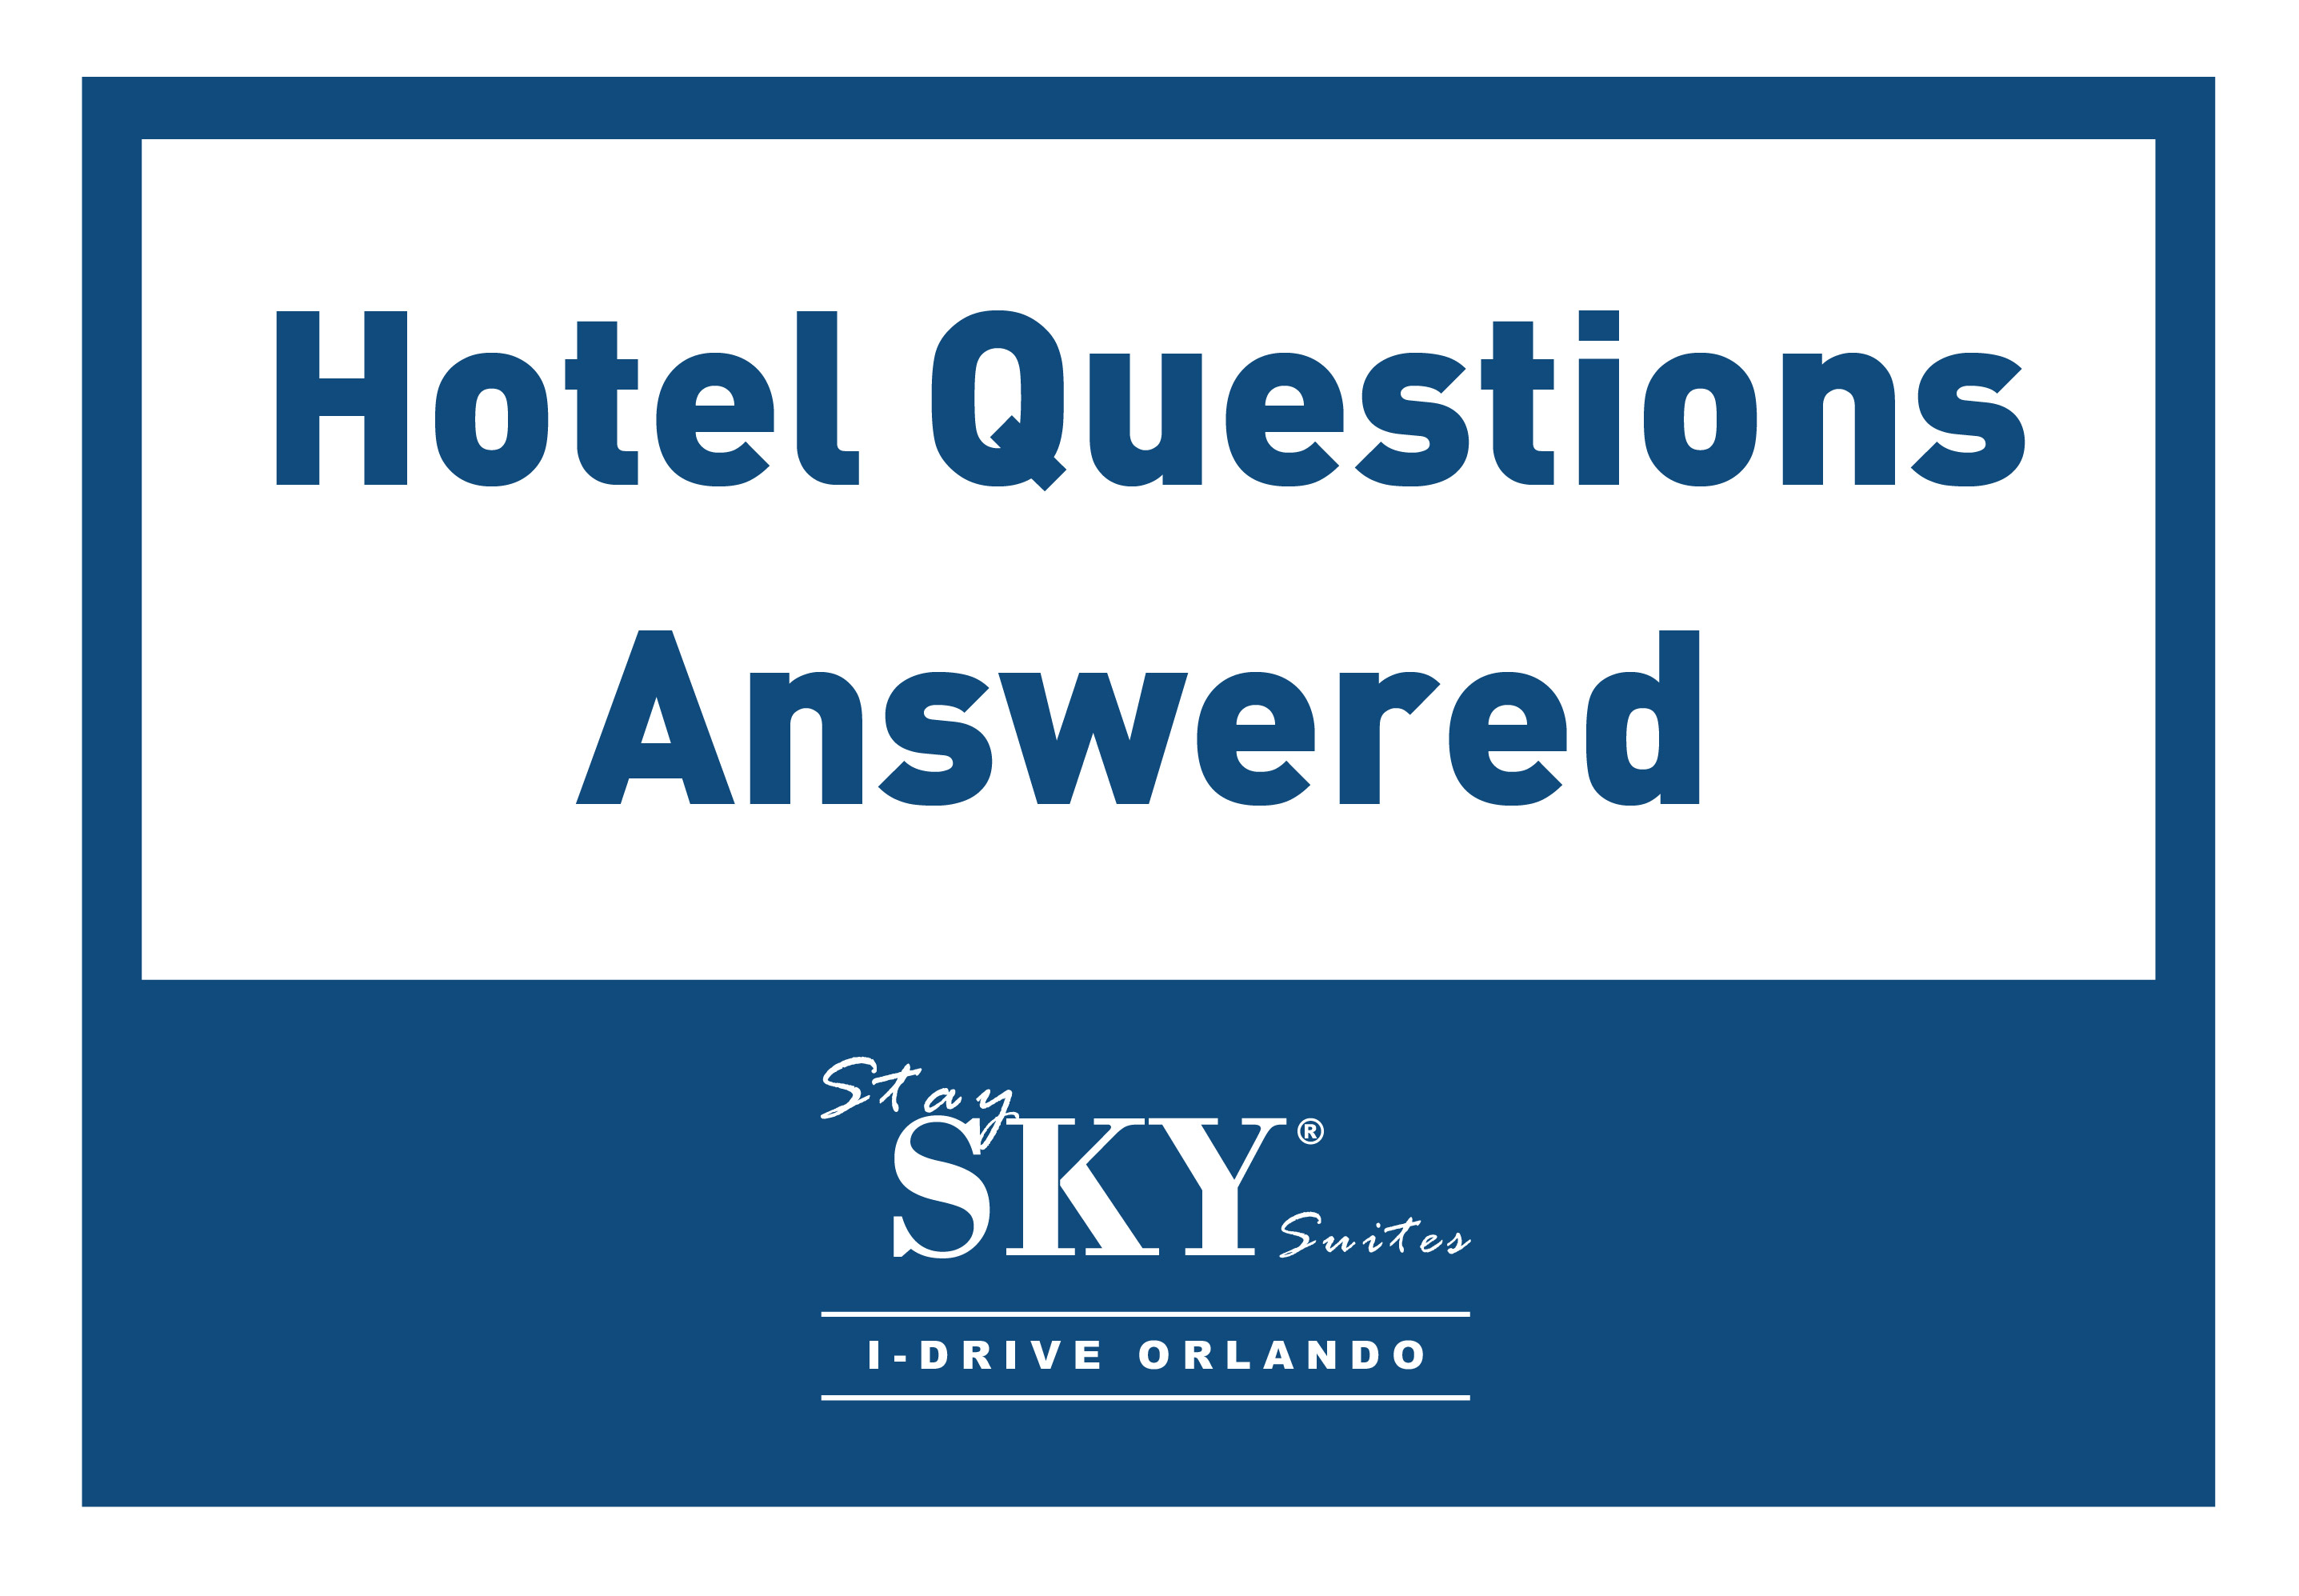 StaySky Suites I - Drive - Orlando Resorts - HotelQuestions